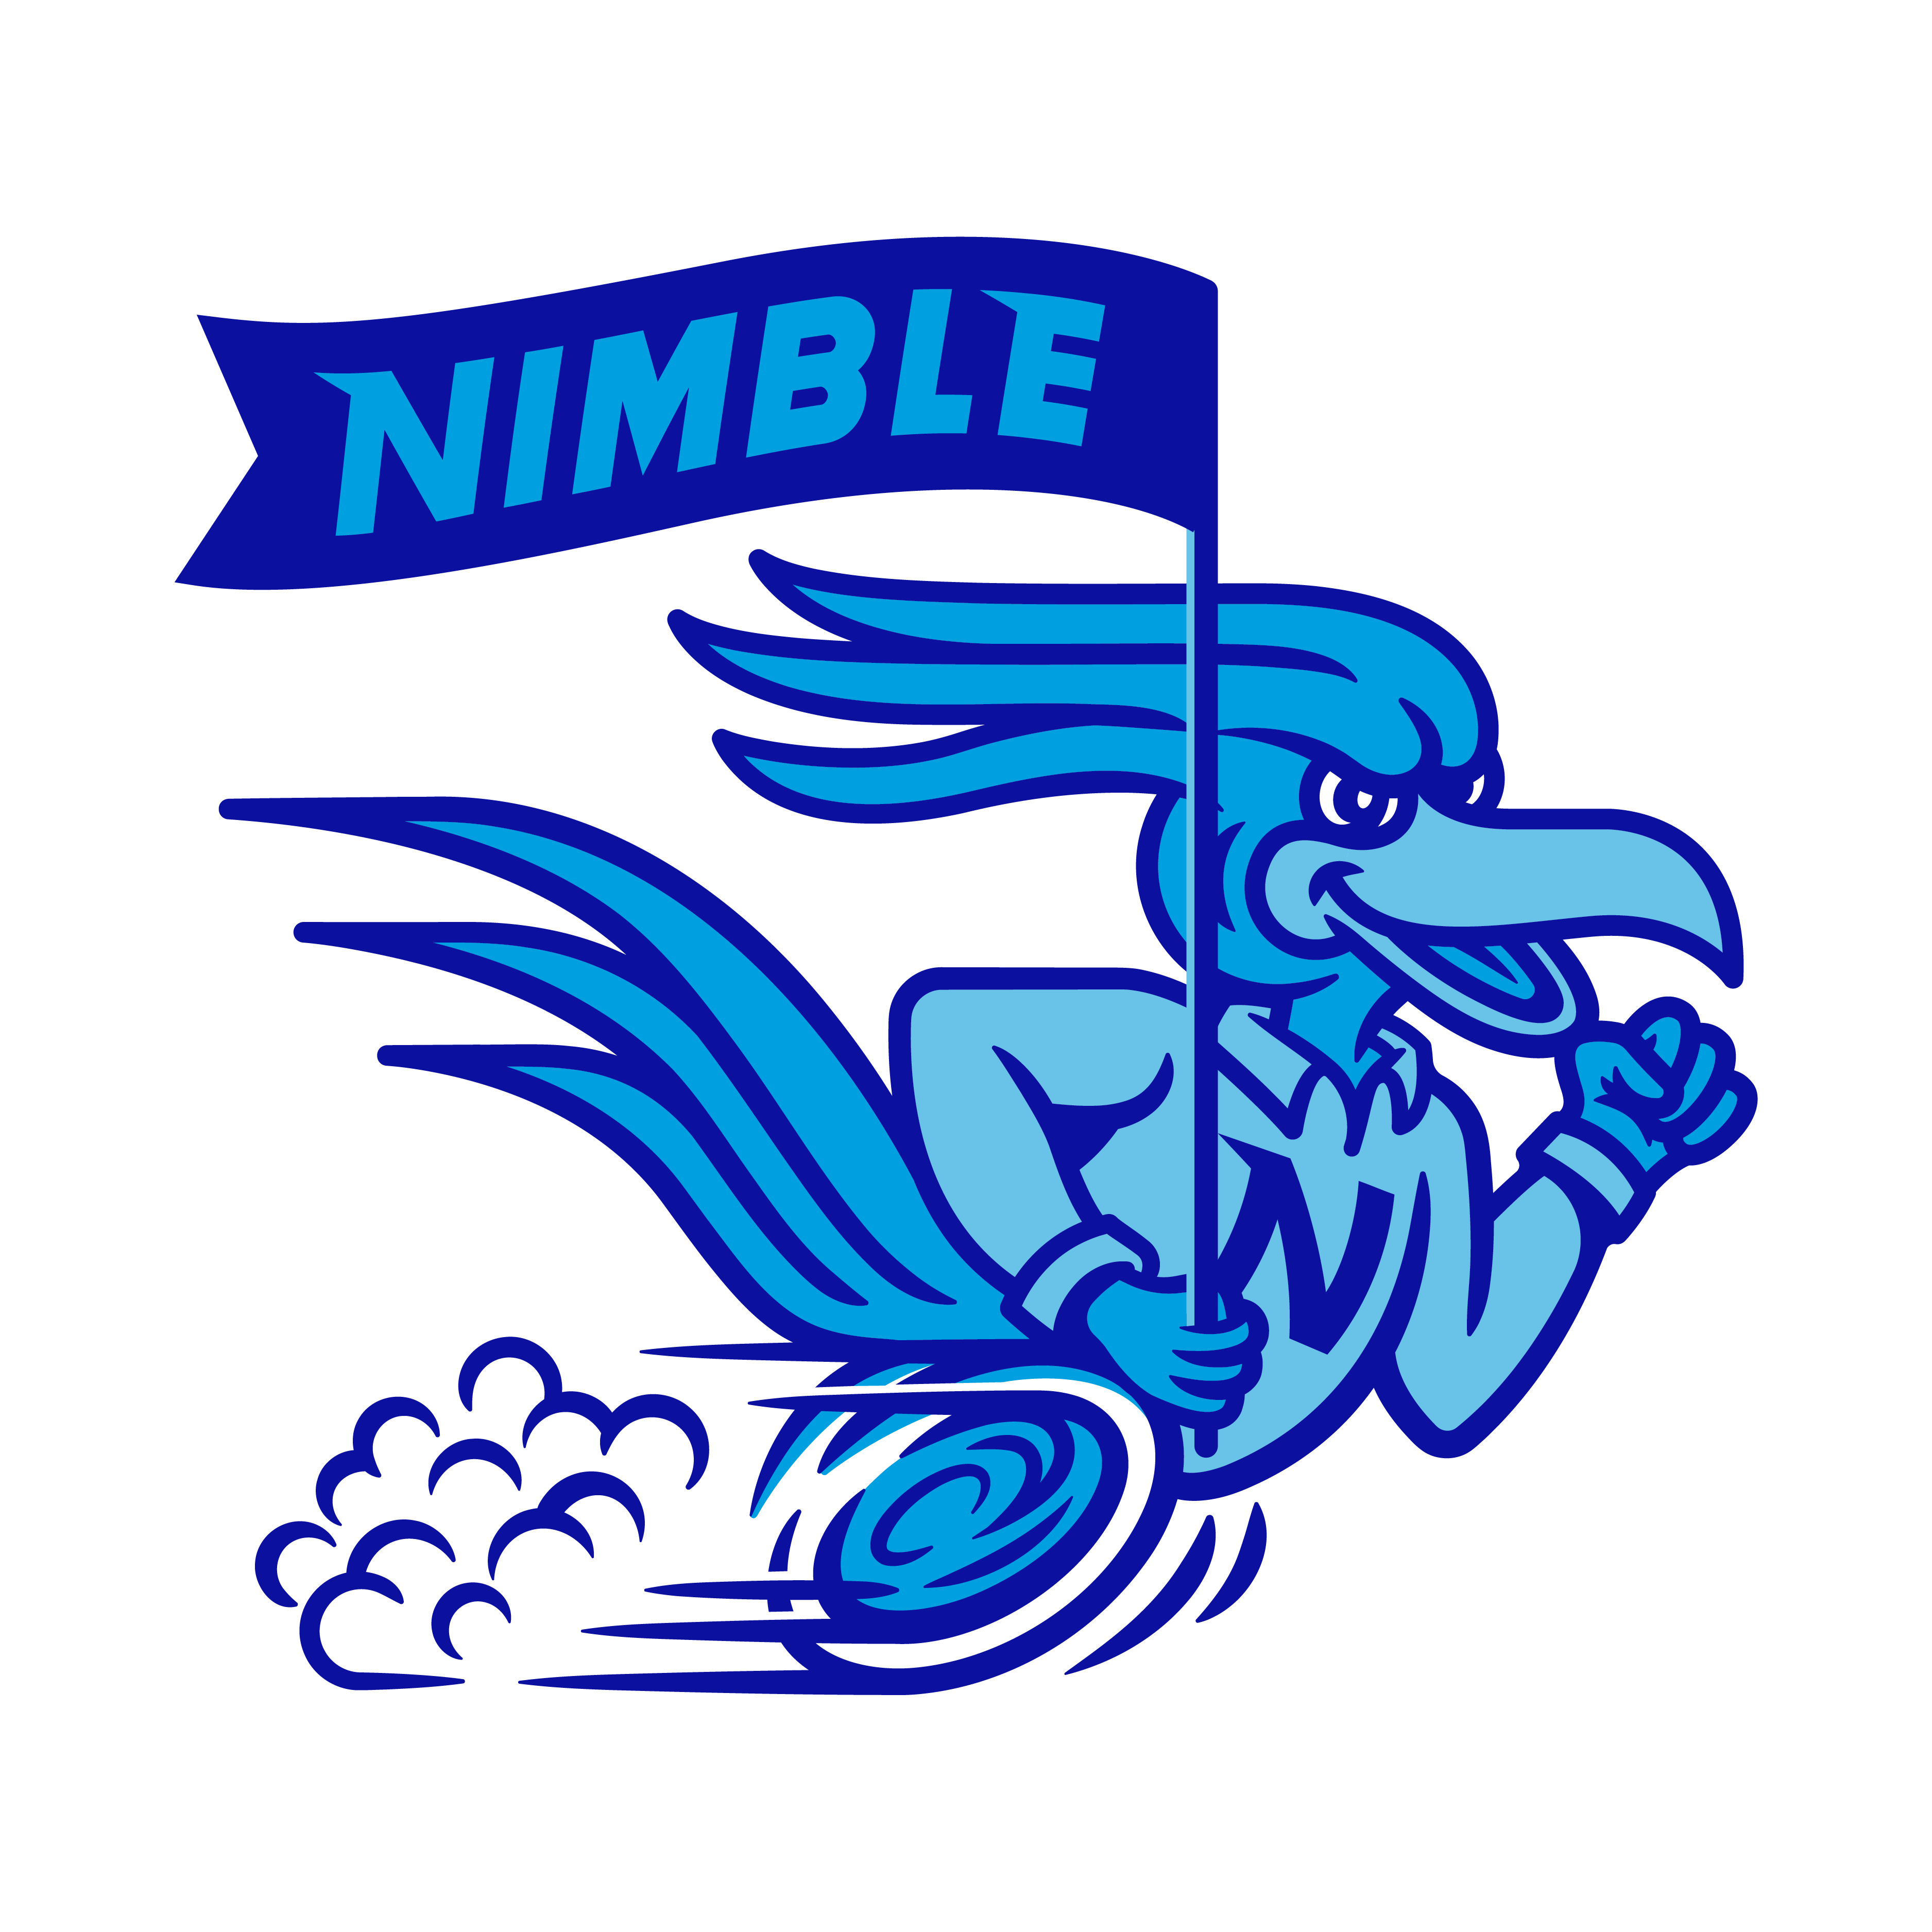 Nimble - Mascot Logo logo design by logo designer Brethren Design Co. for your inspiration and for the worlds largest logo competition